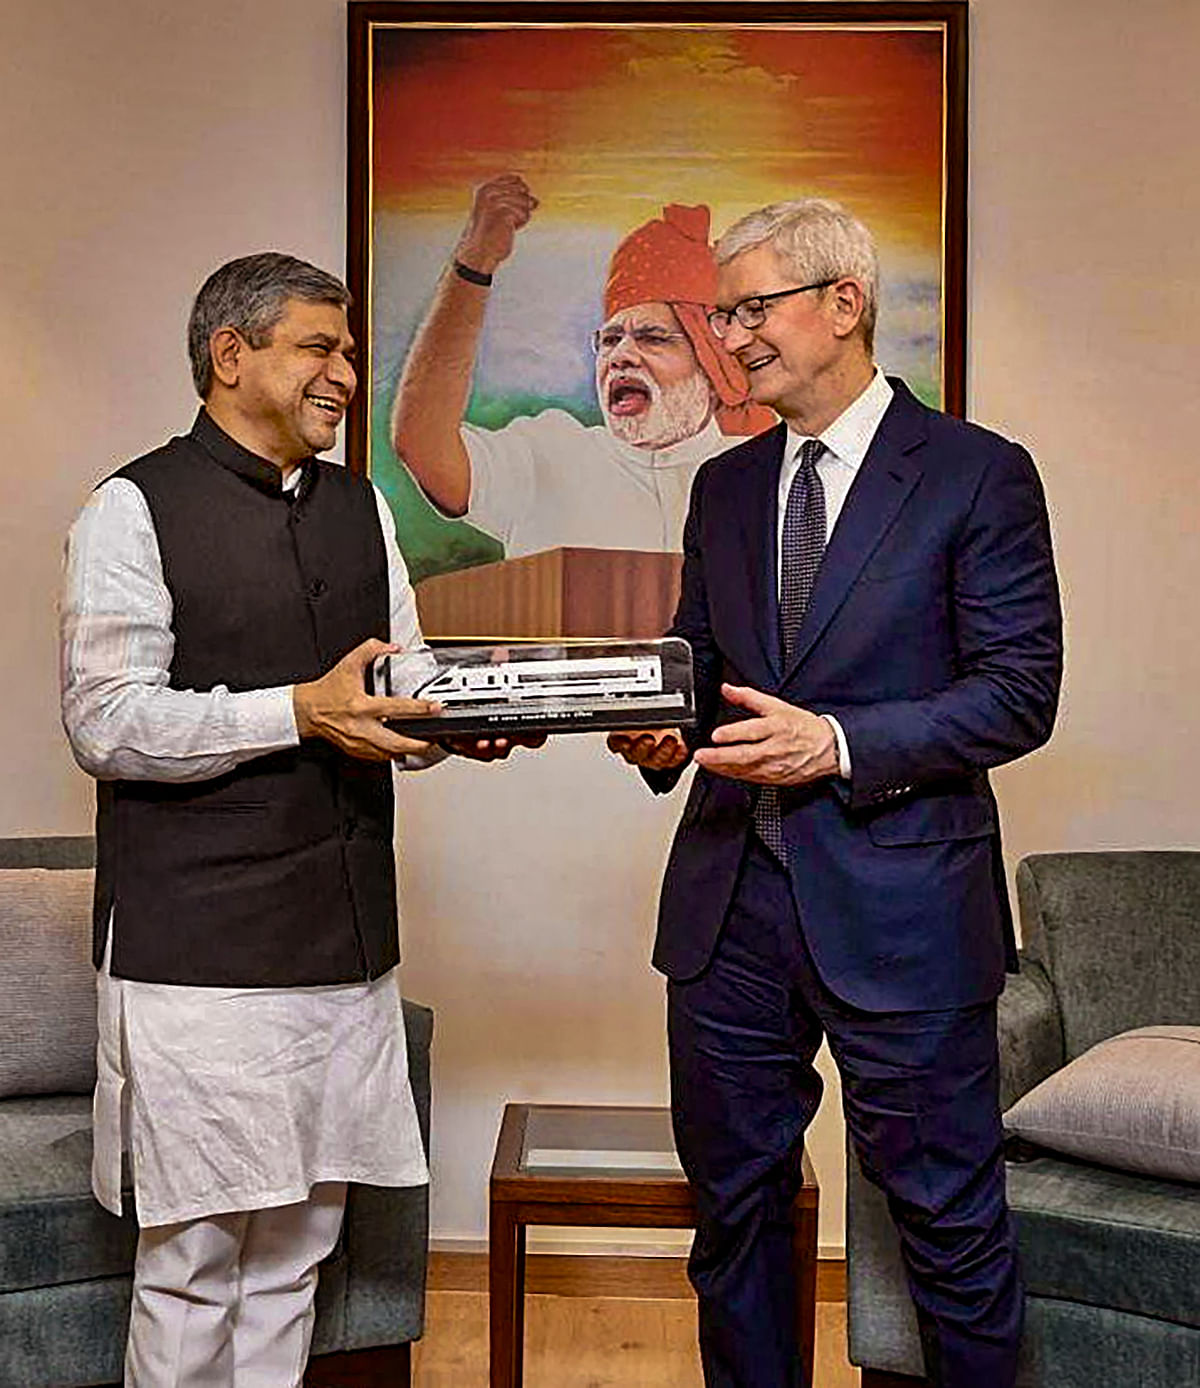 After the opening of India's first Apple Store in Mumbai's BKC, Tim Cook flew to New Delhi for the launch in Saket.